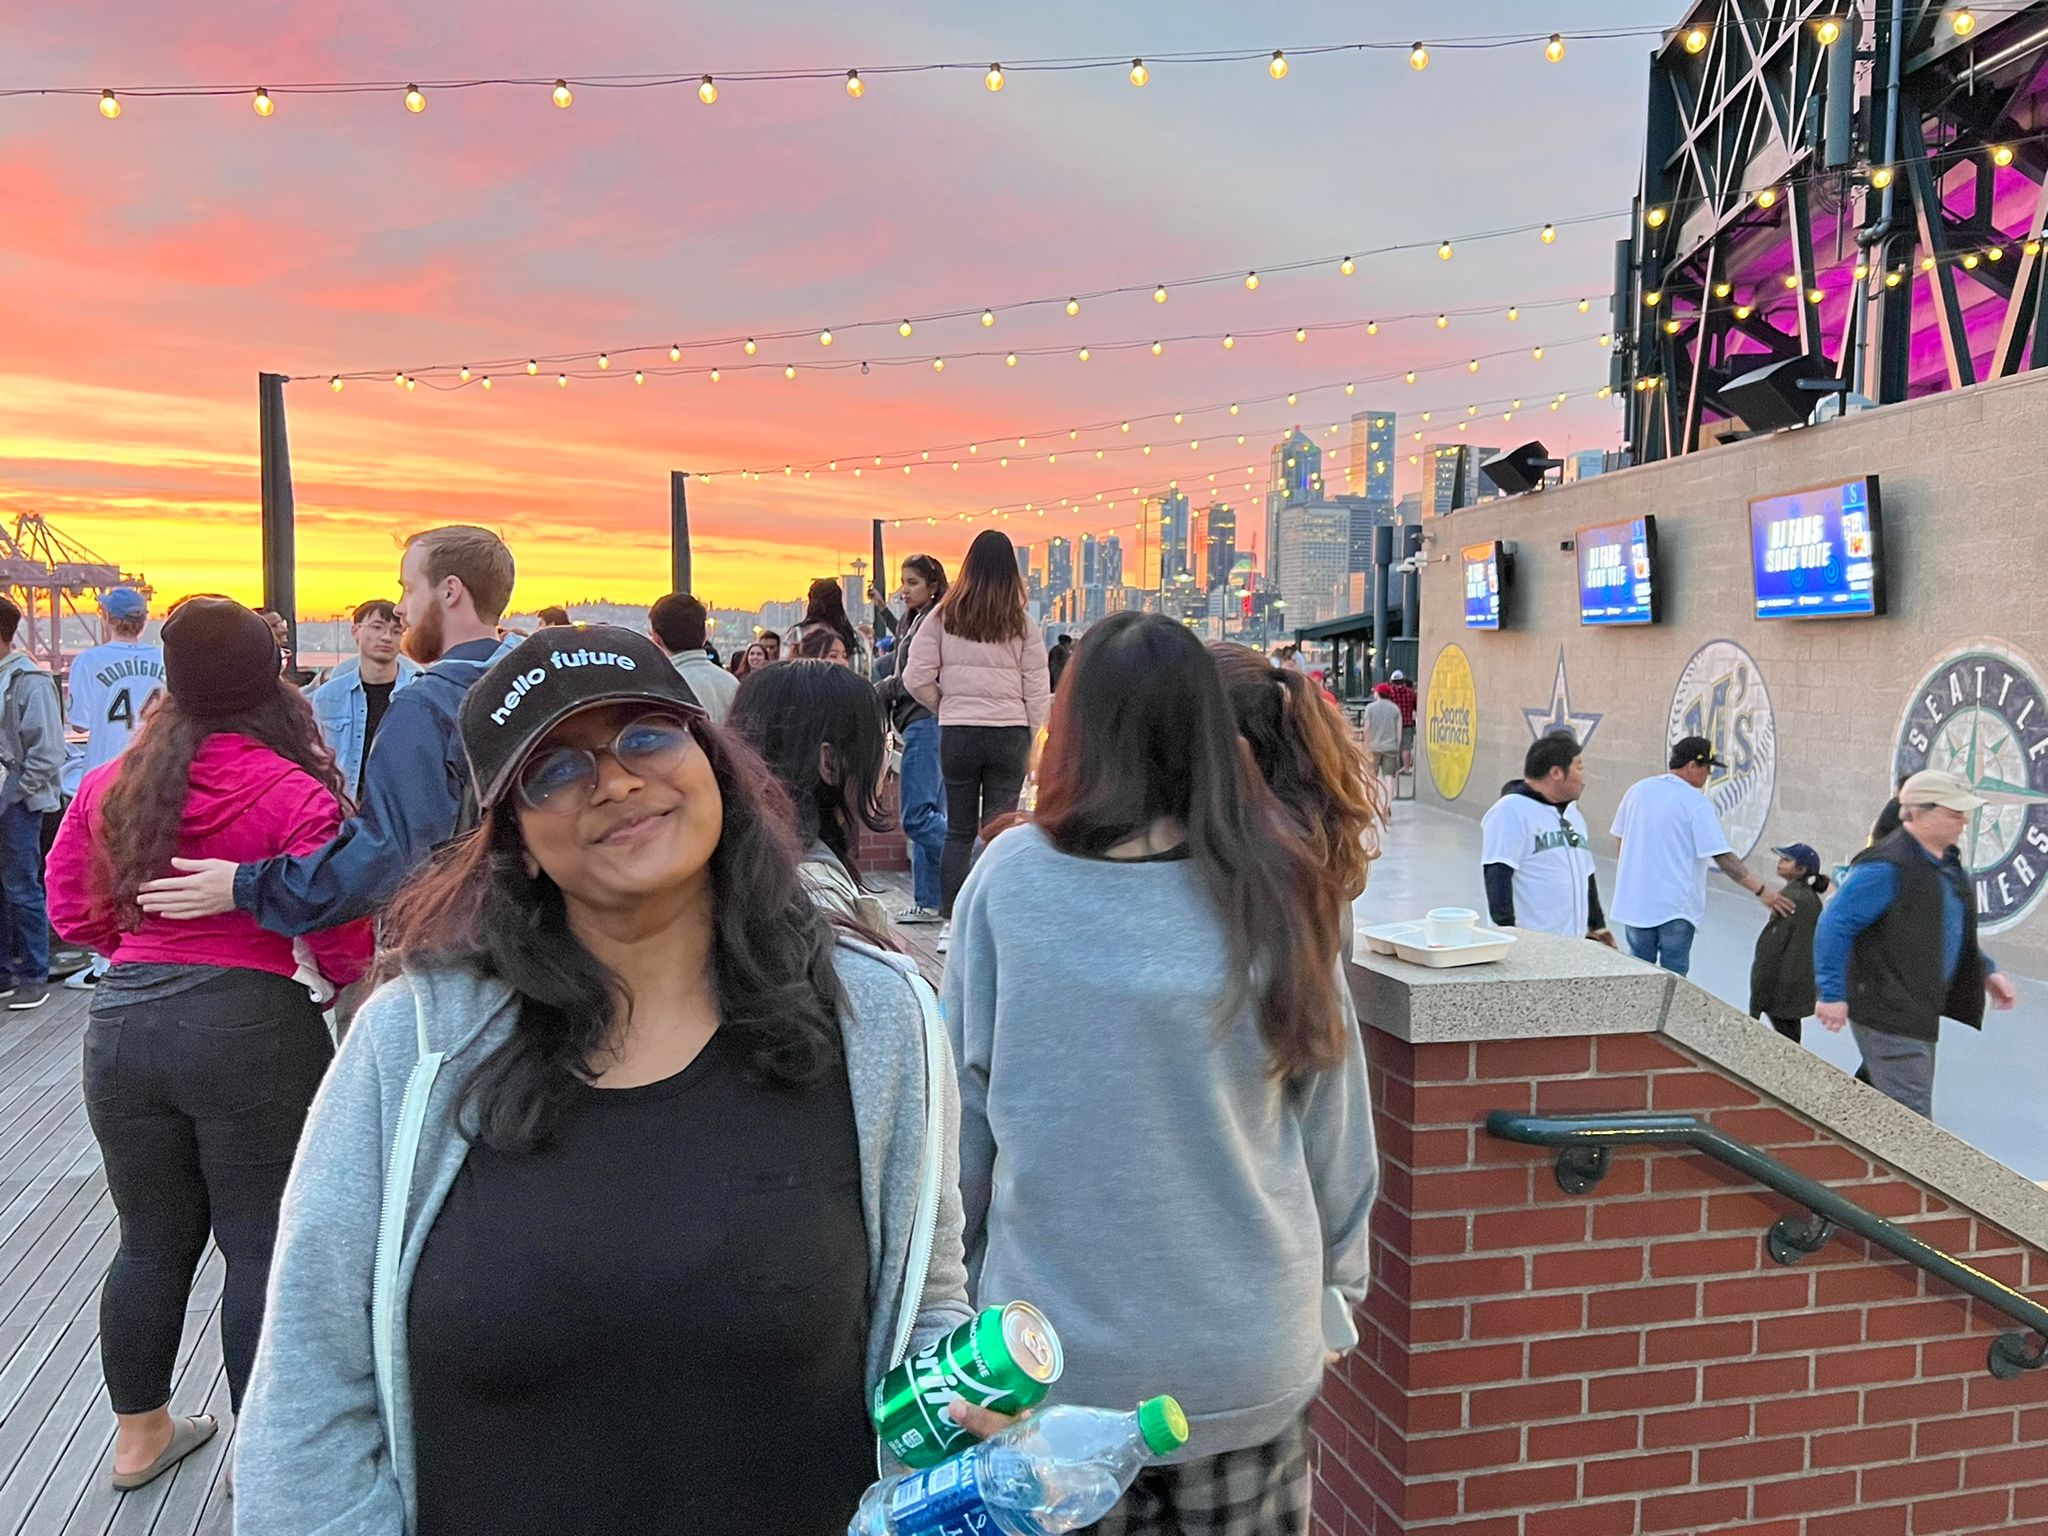 student pranathi alla stands on a rooftop on a summer evening. behind her, the sky is bright orange and red with the setting sun.